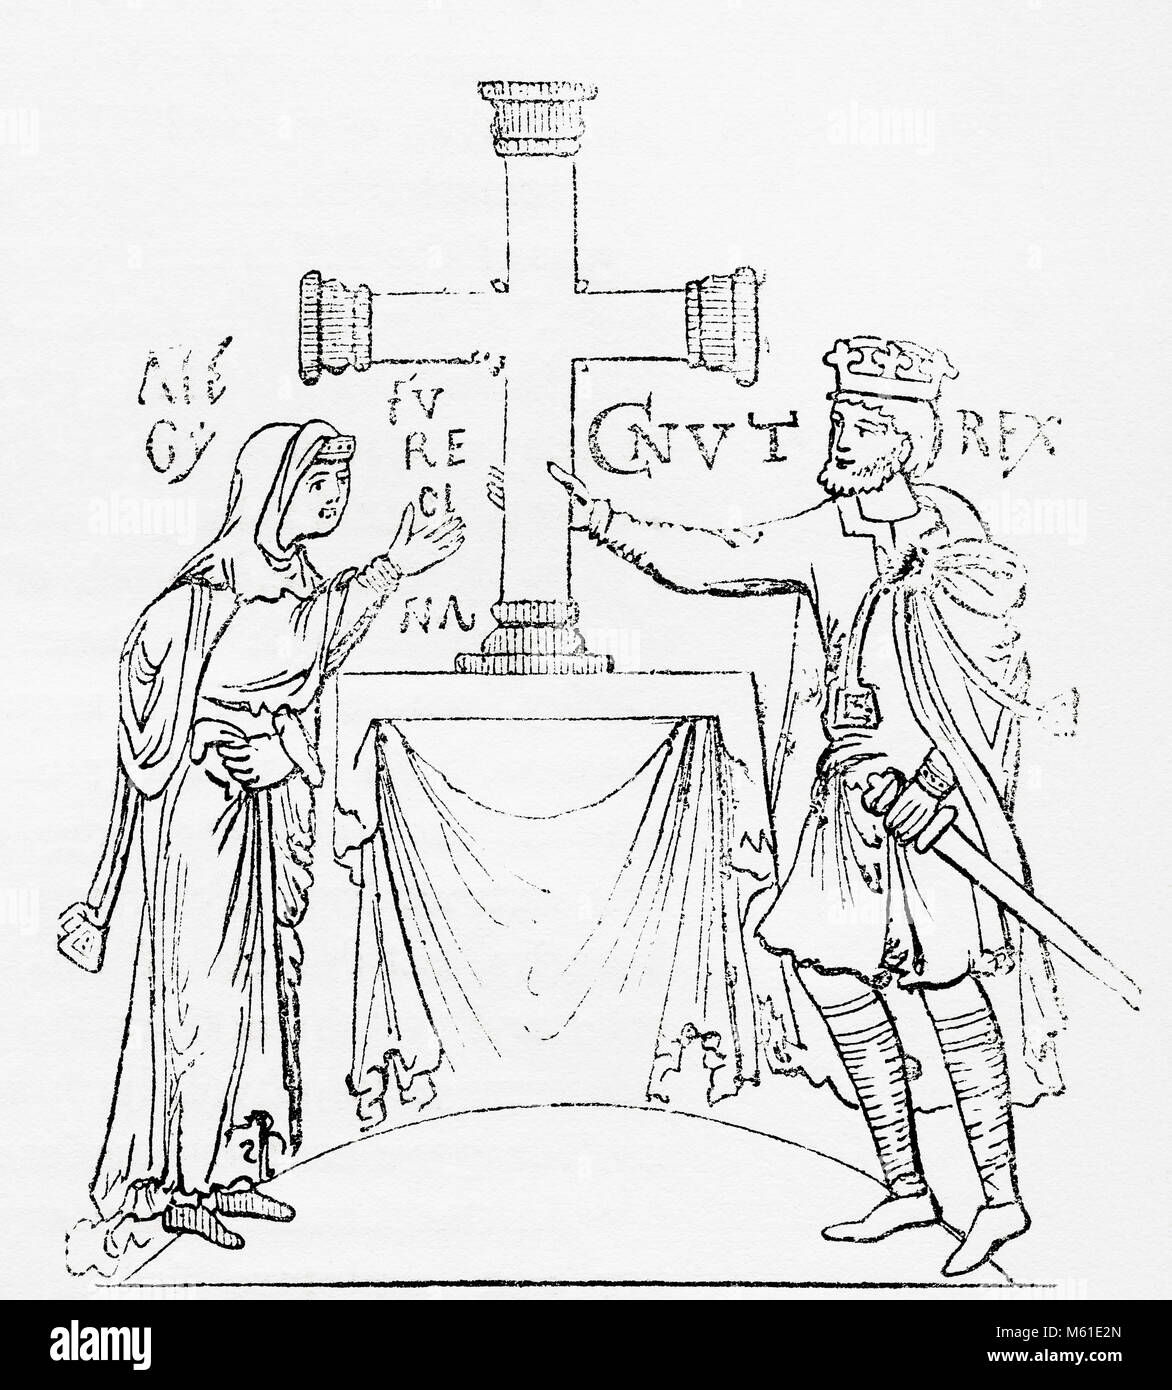 Cnut the Great and his queen Ælfgifu of Northampton.  Cnut the Great, c. 995 - 1035, aka Canute.  King of Denmark, England and Norway.  Ælfgifu of Northampton,c. 990 – after 1036.  First wife of King Cnut of England and Denmark, mother of King Harold I of England and Queen regent of Norway from 1030 to 1035.  From Old England: A Pictorial Museum, published 1847. Stock Photo